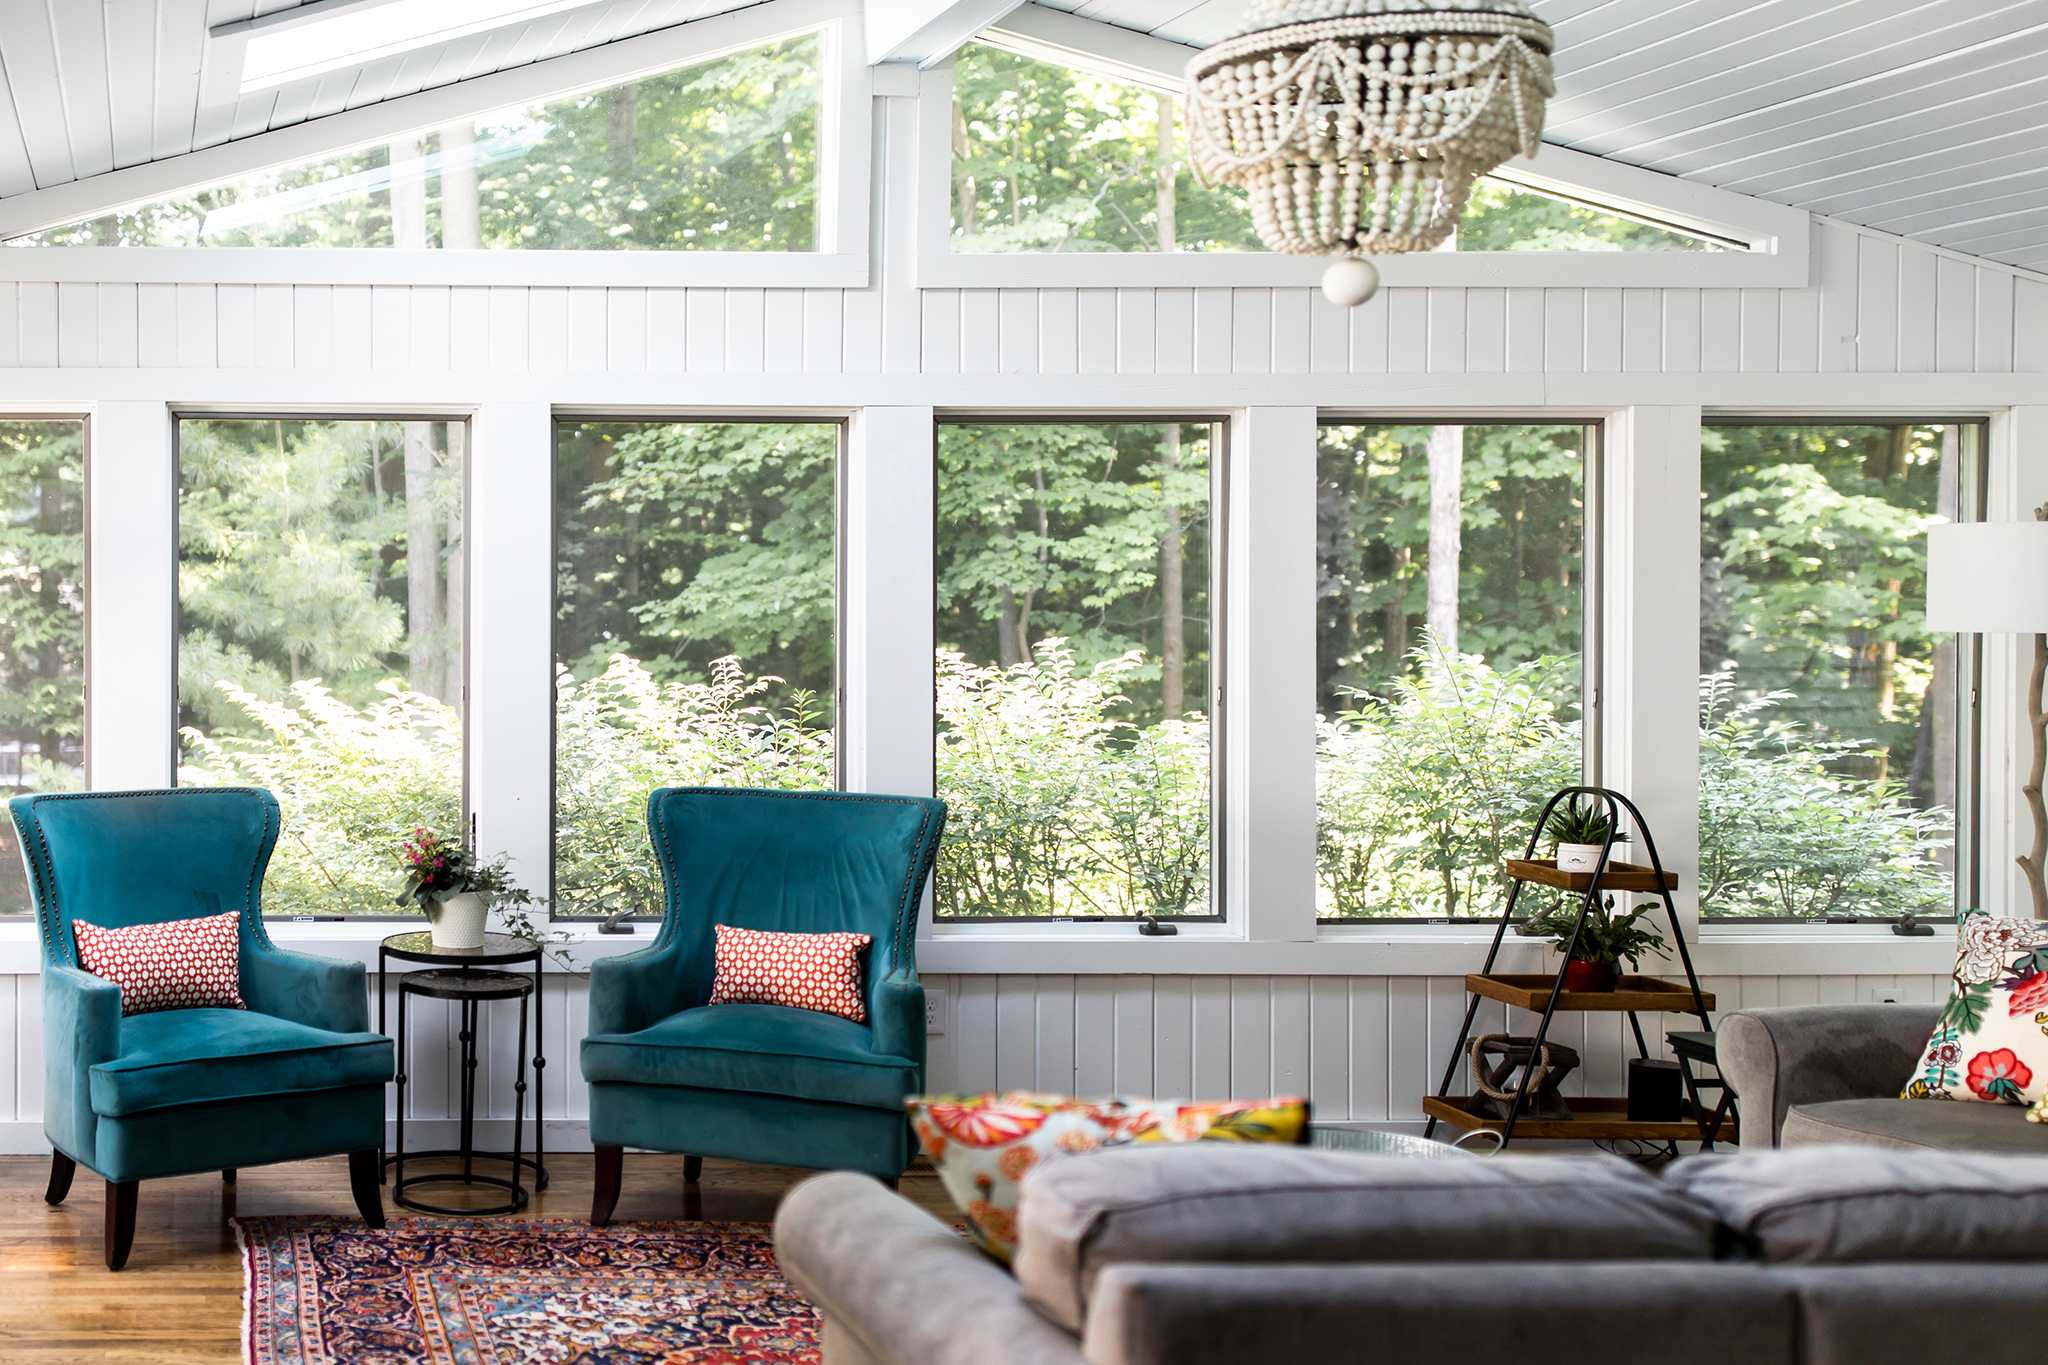 Before & After: Sunroom Edition